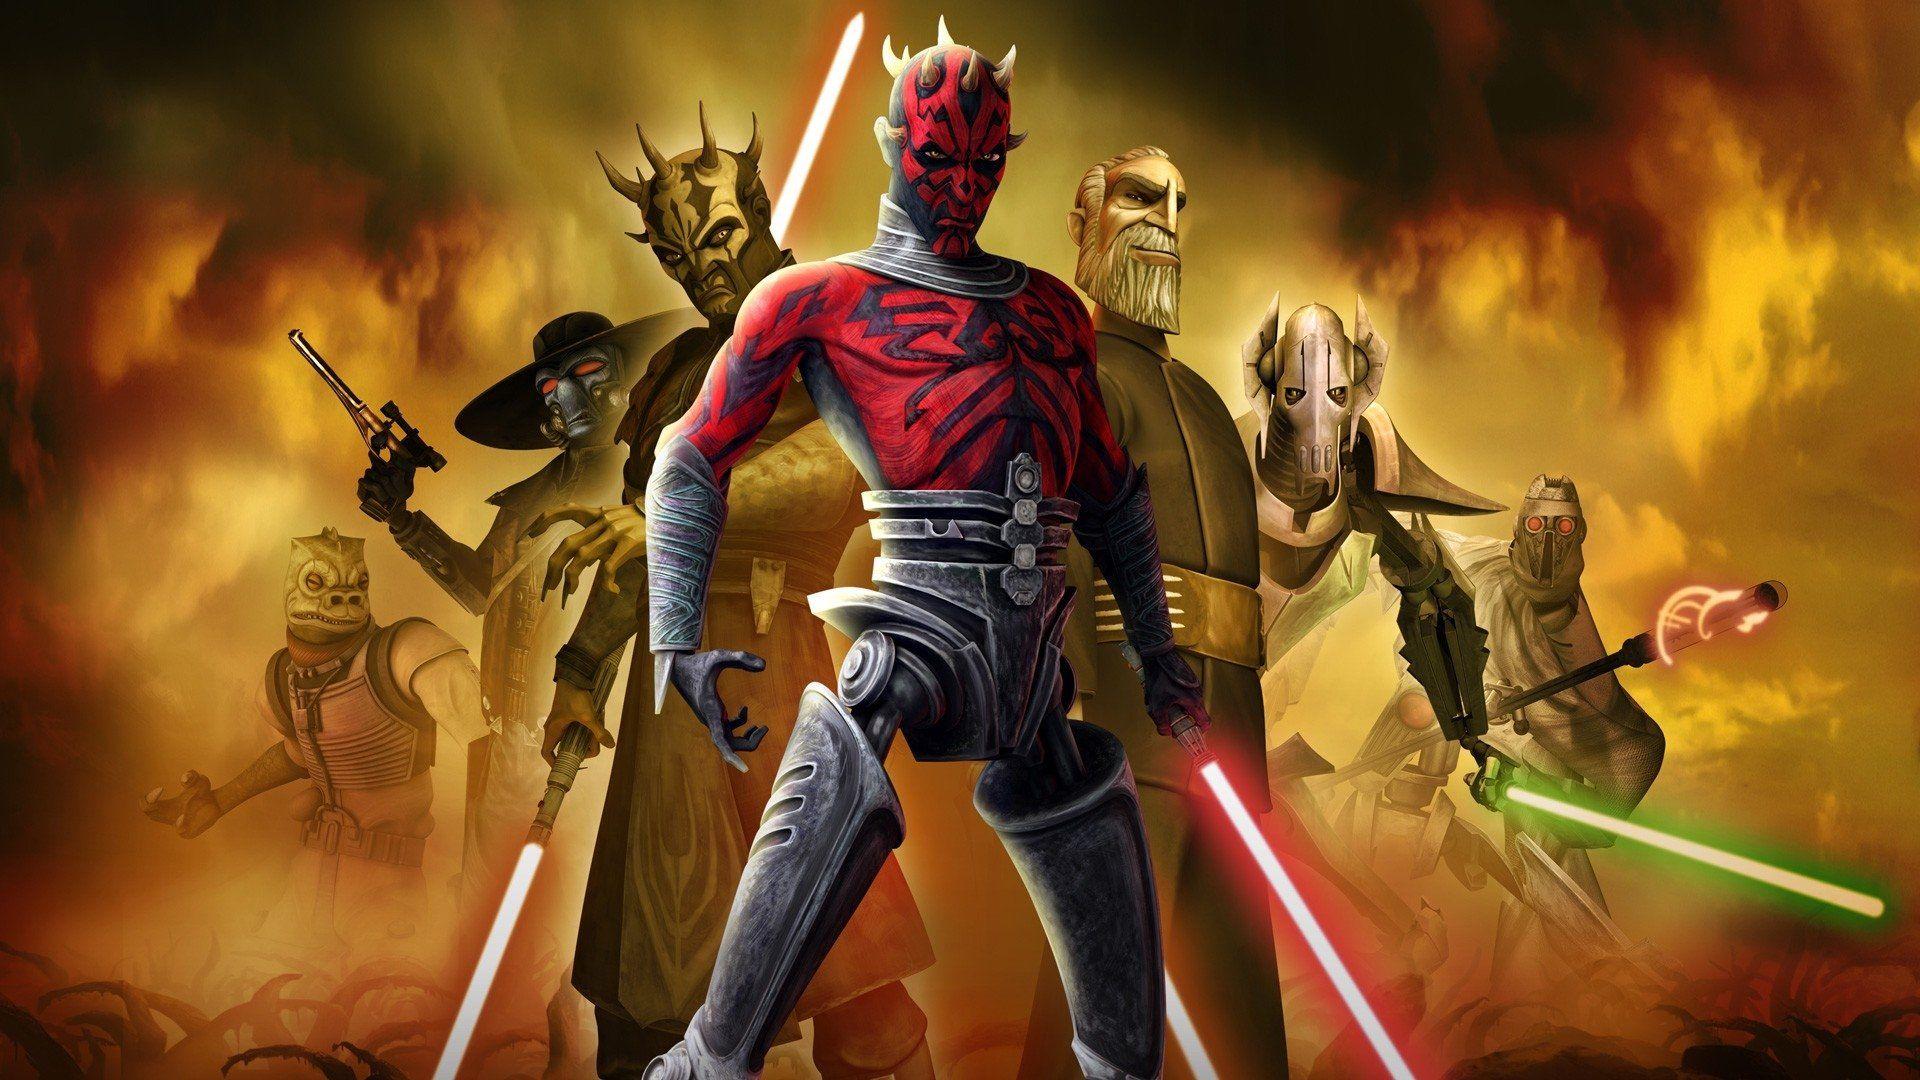 Star Wars: The Clone Wars HD Wallpaper. Background Image